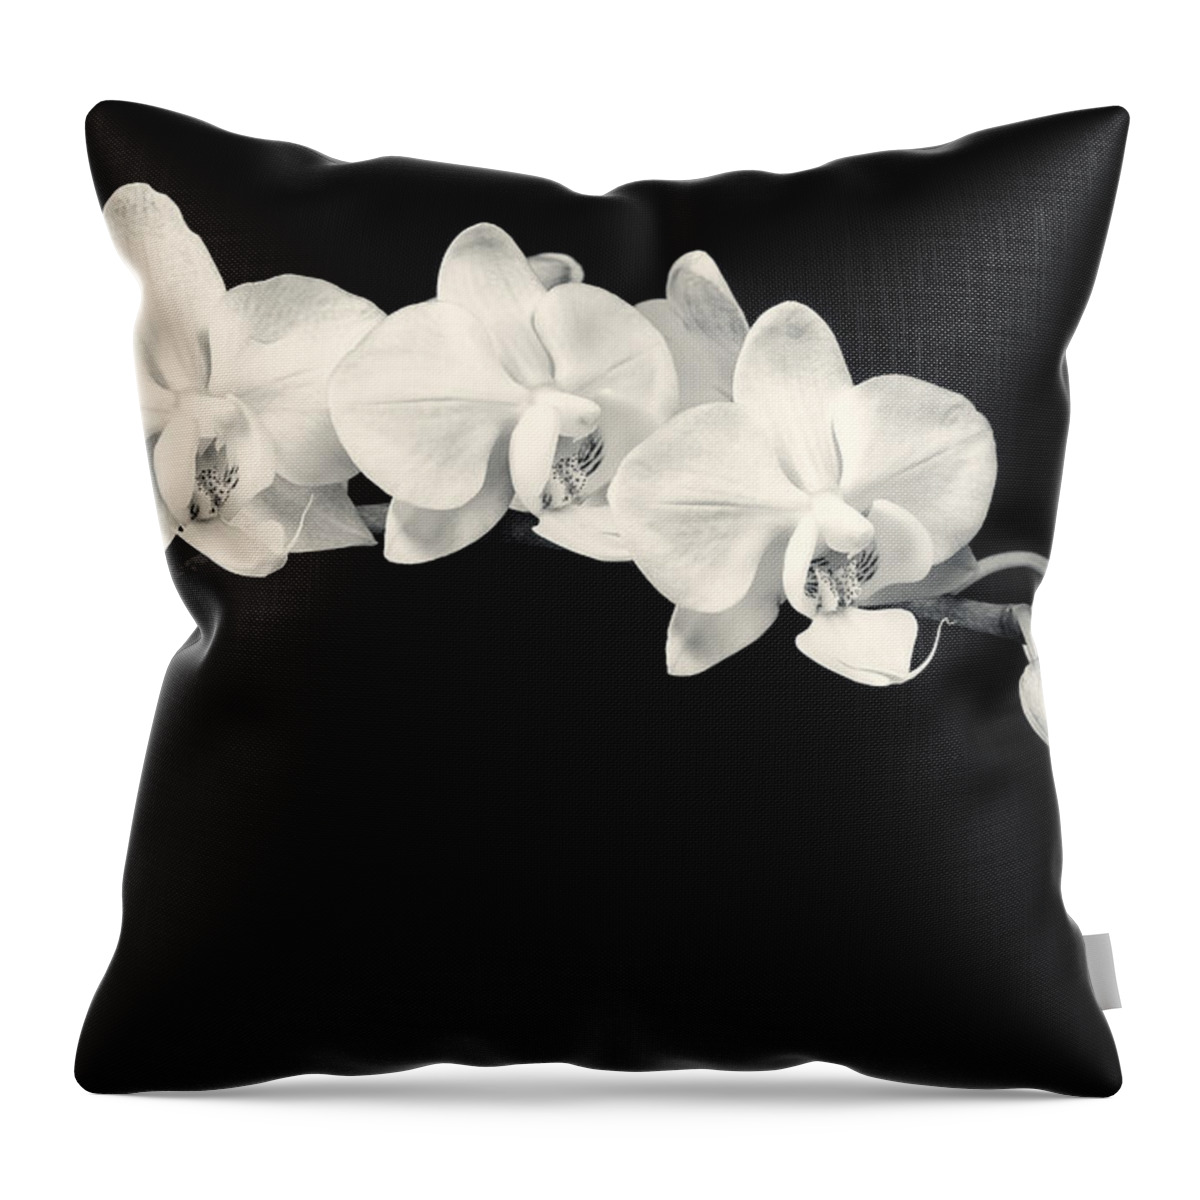 3scape Throw Pillow featuring the photograph White Orchids Monochrome by Adam Romanowicz